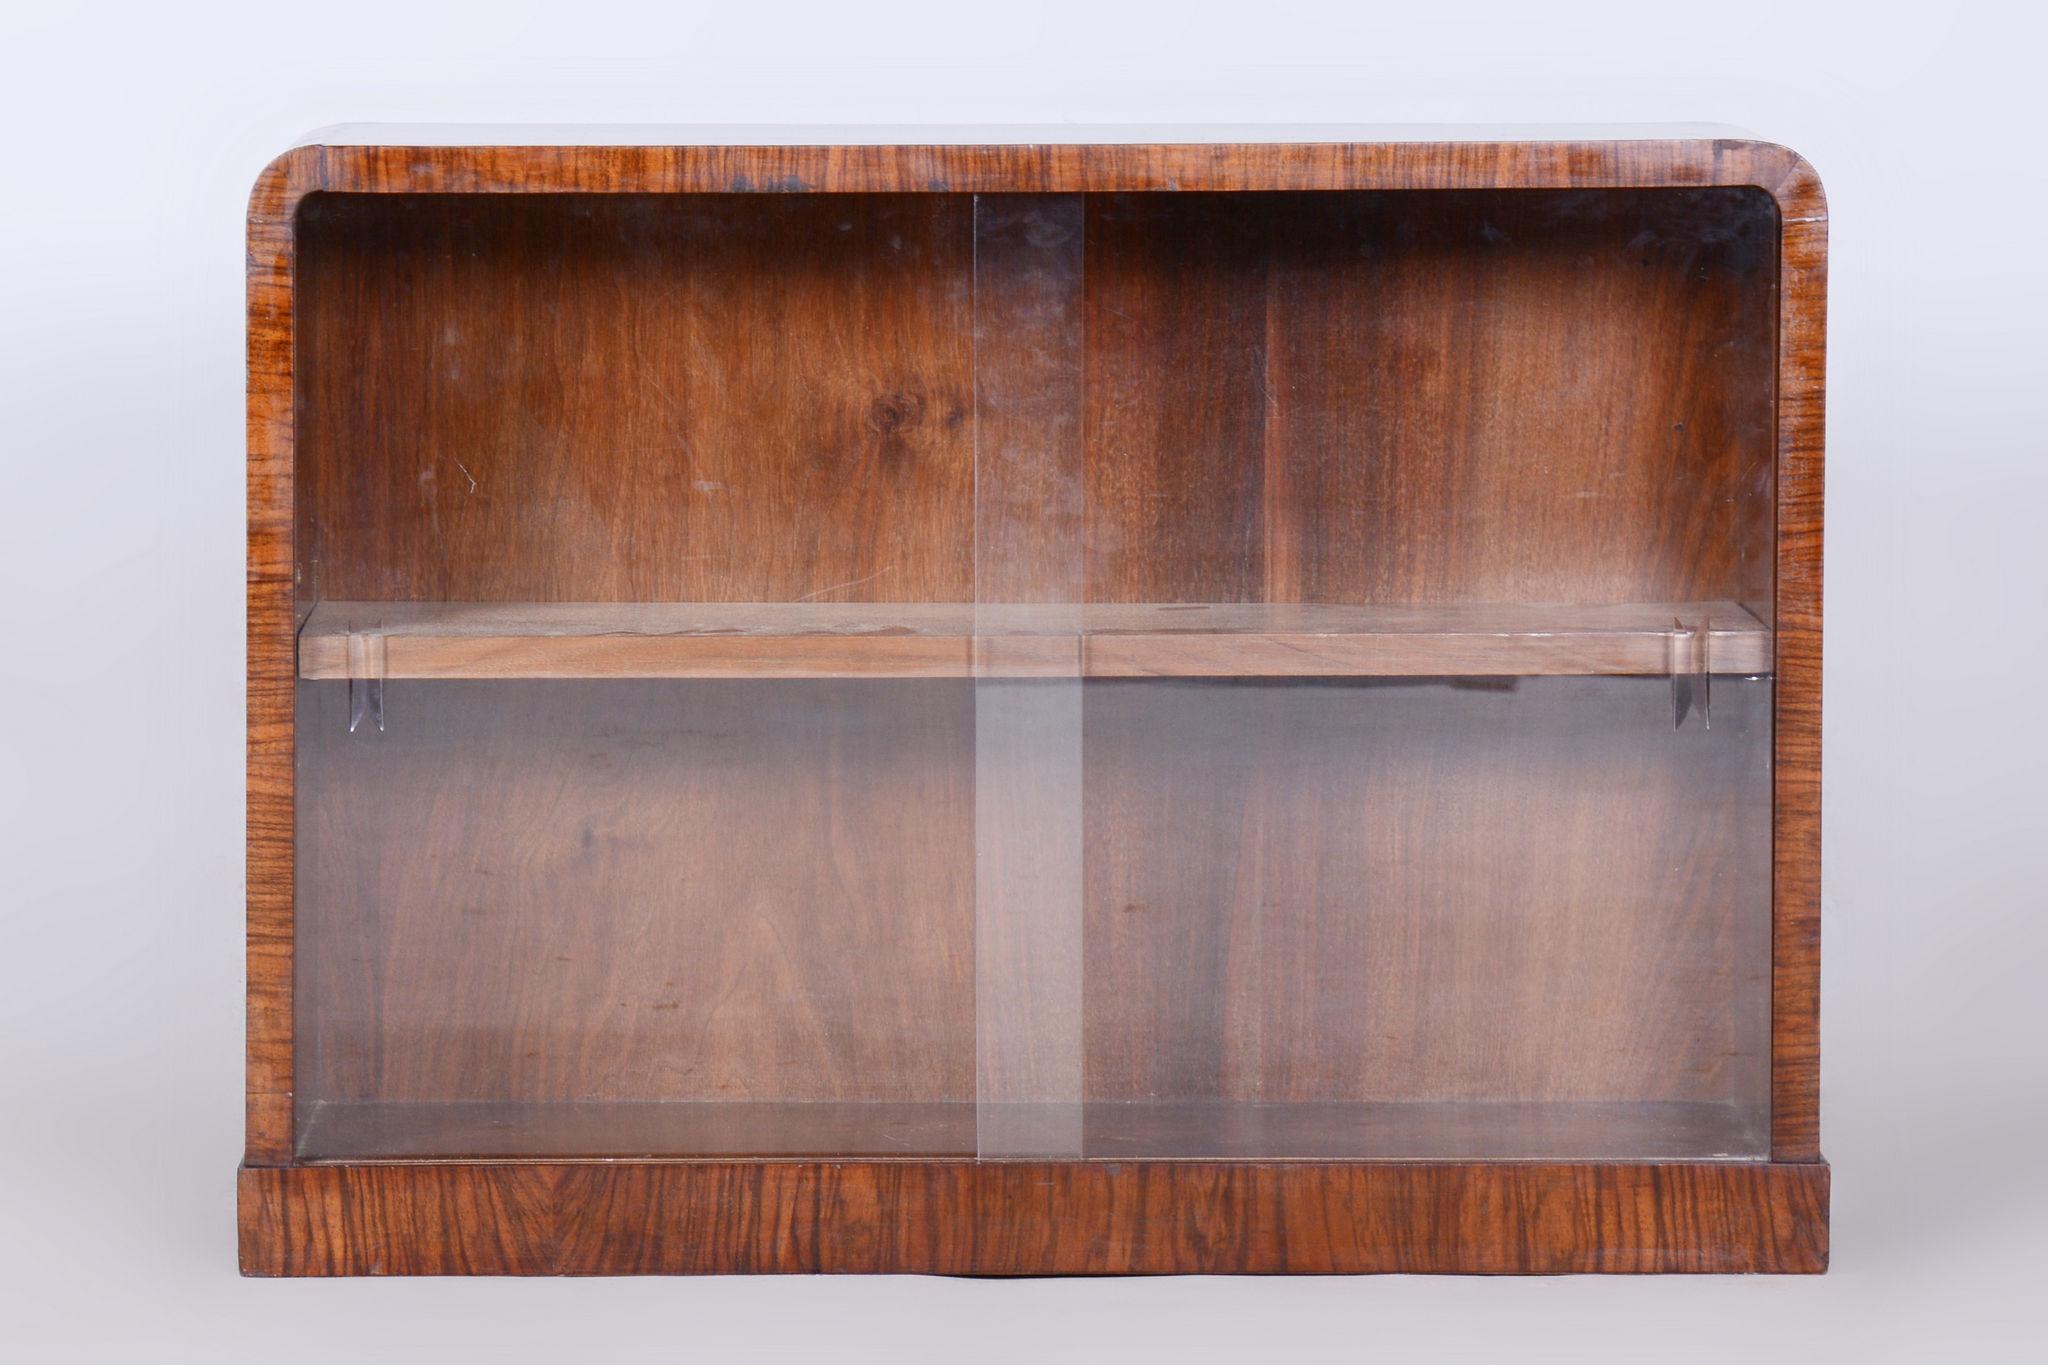 Small Restored Art Deco Display Bookcase, Walnut and Glass, Czech, 1930s For Sale 1